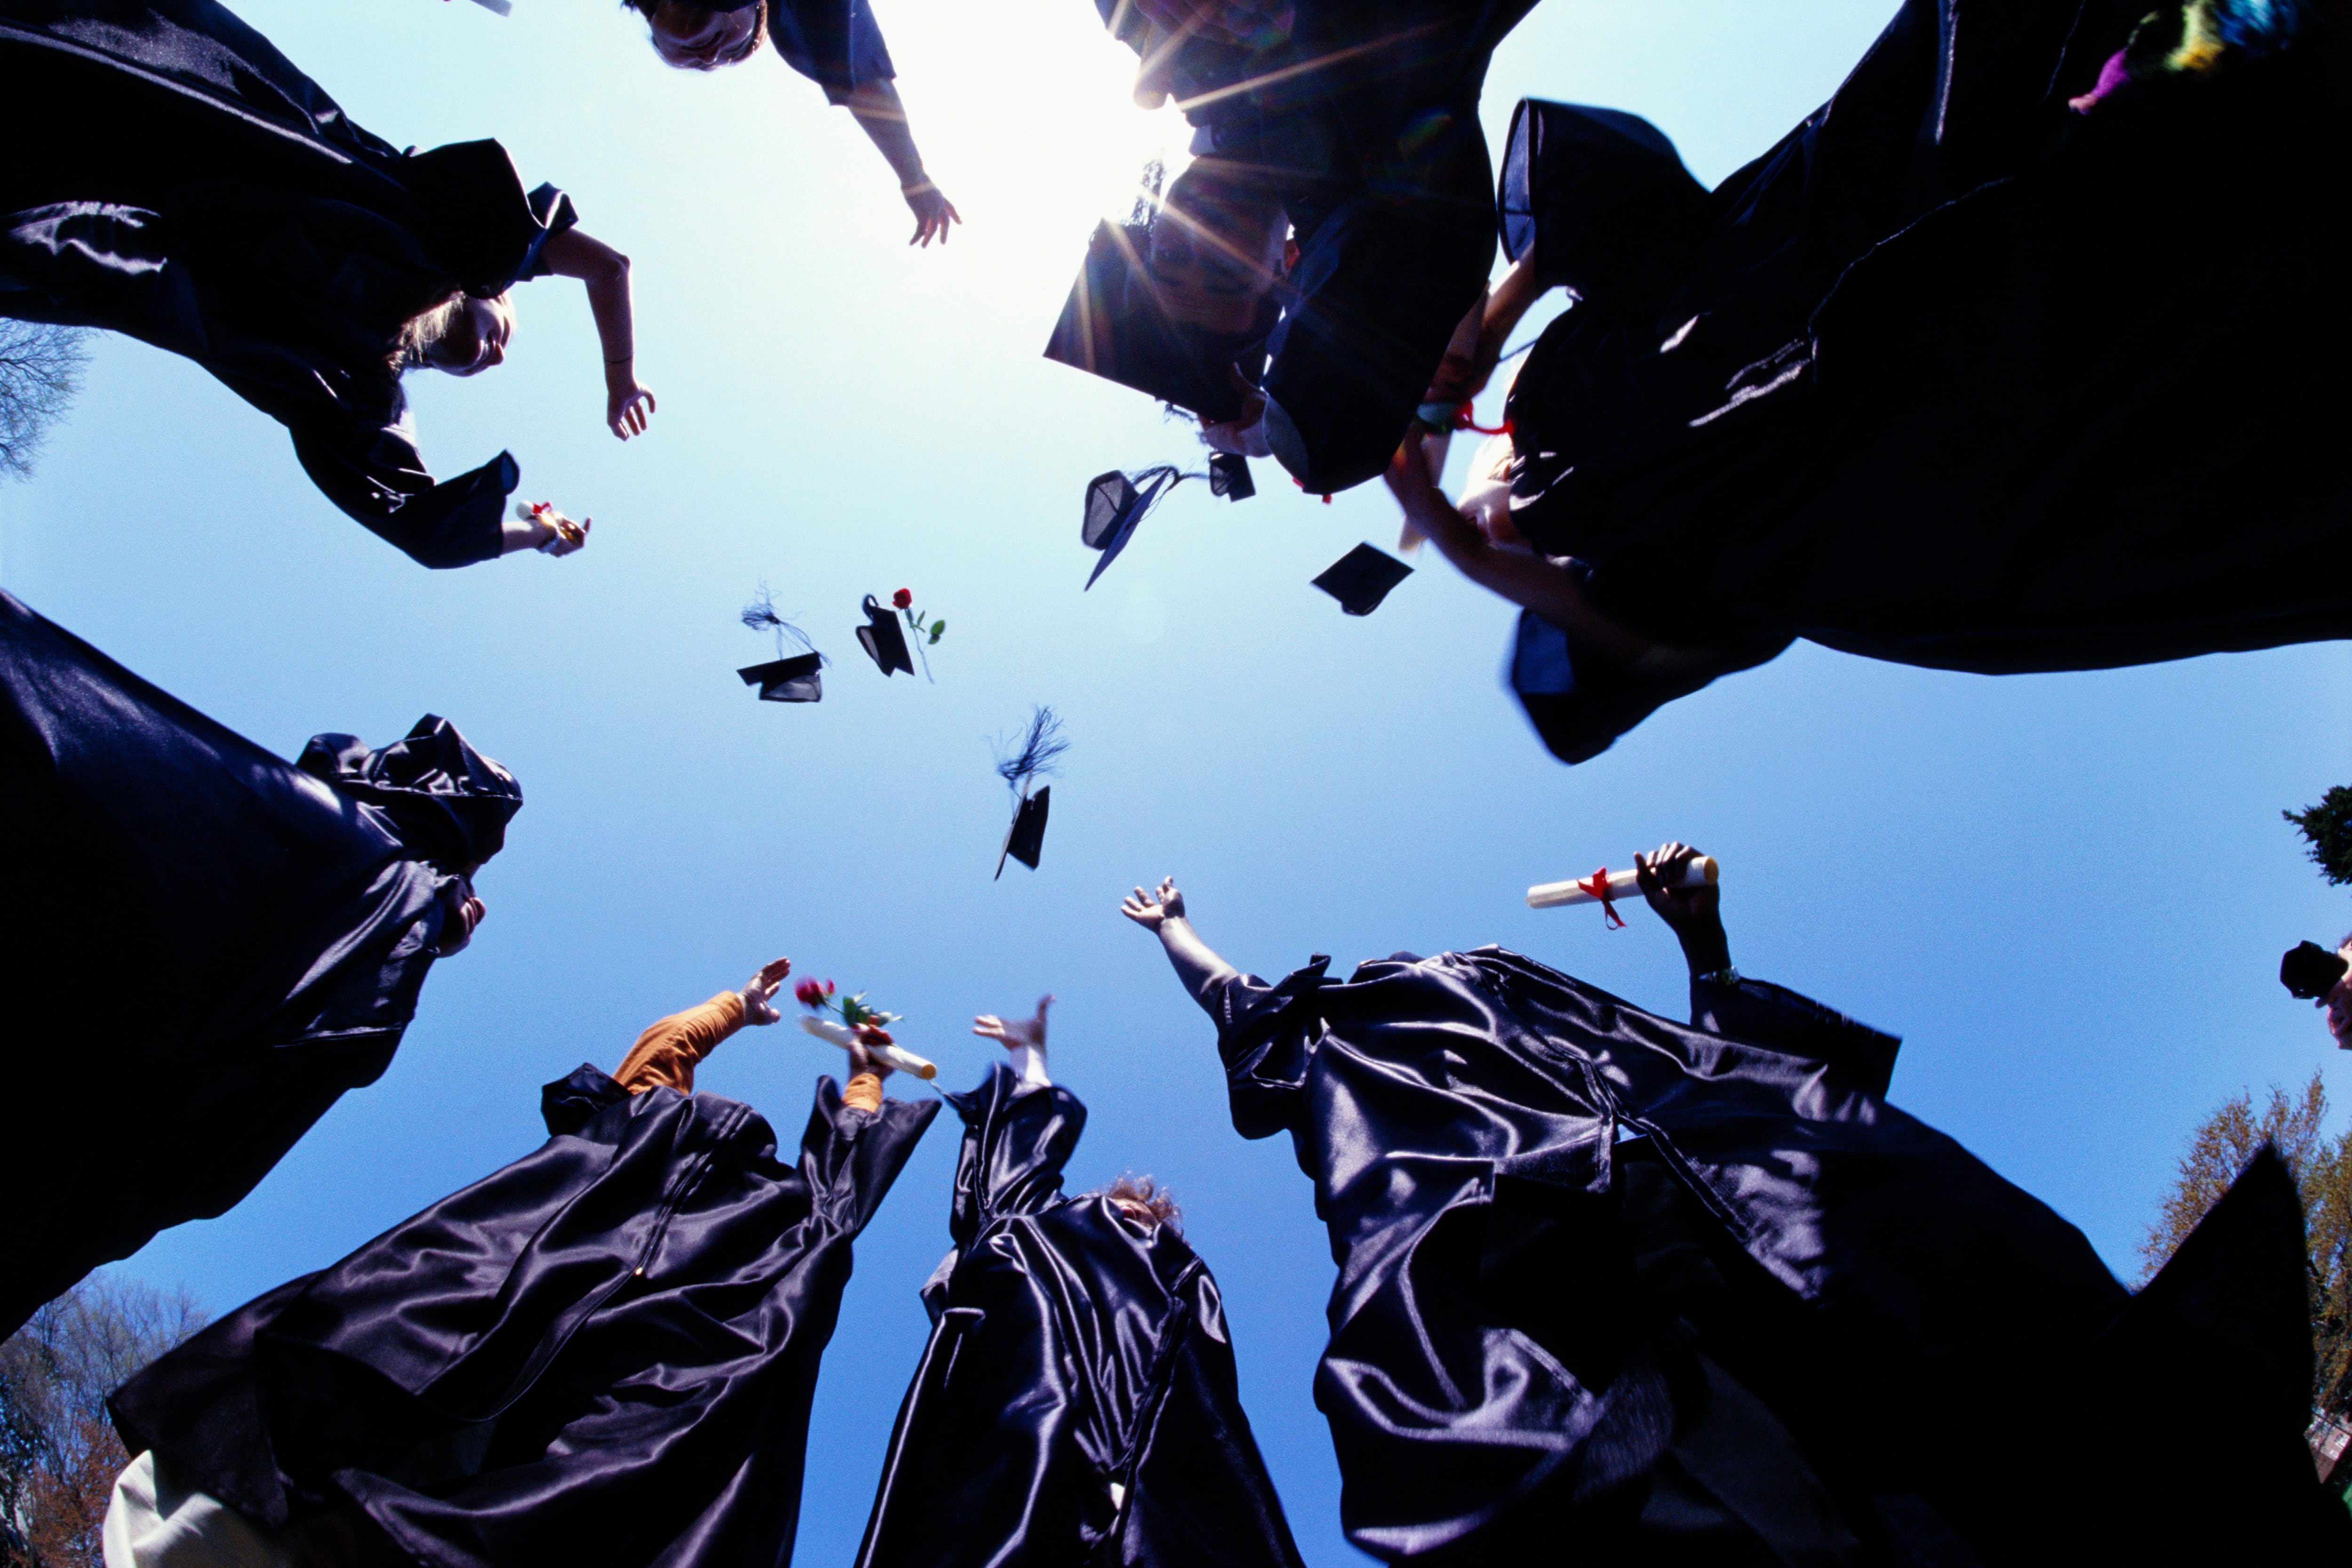 A bunch of people in purple graduation gowns toss their mortarboards.